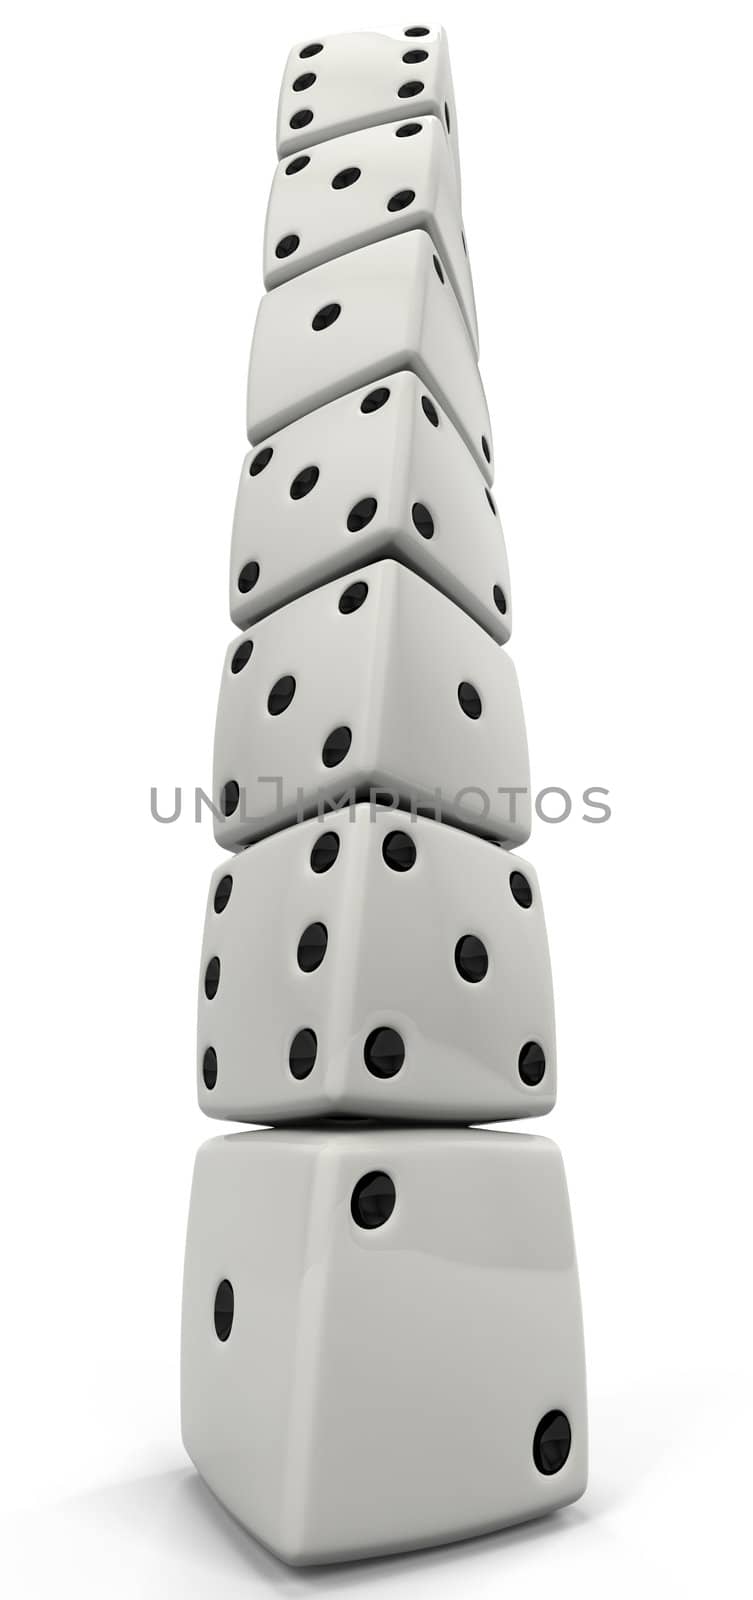 A tower of dice viewed from the bottom, with dramatic perspective.